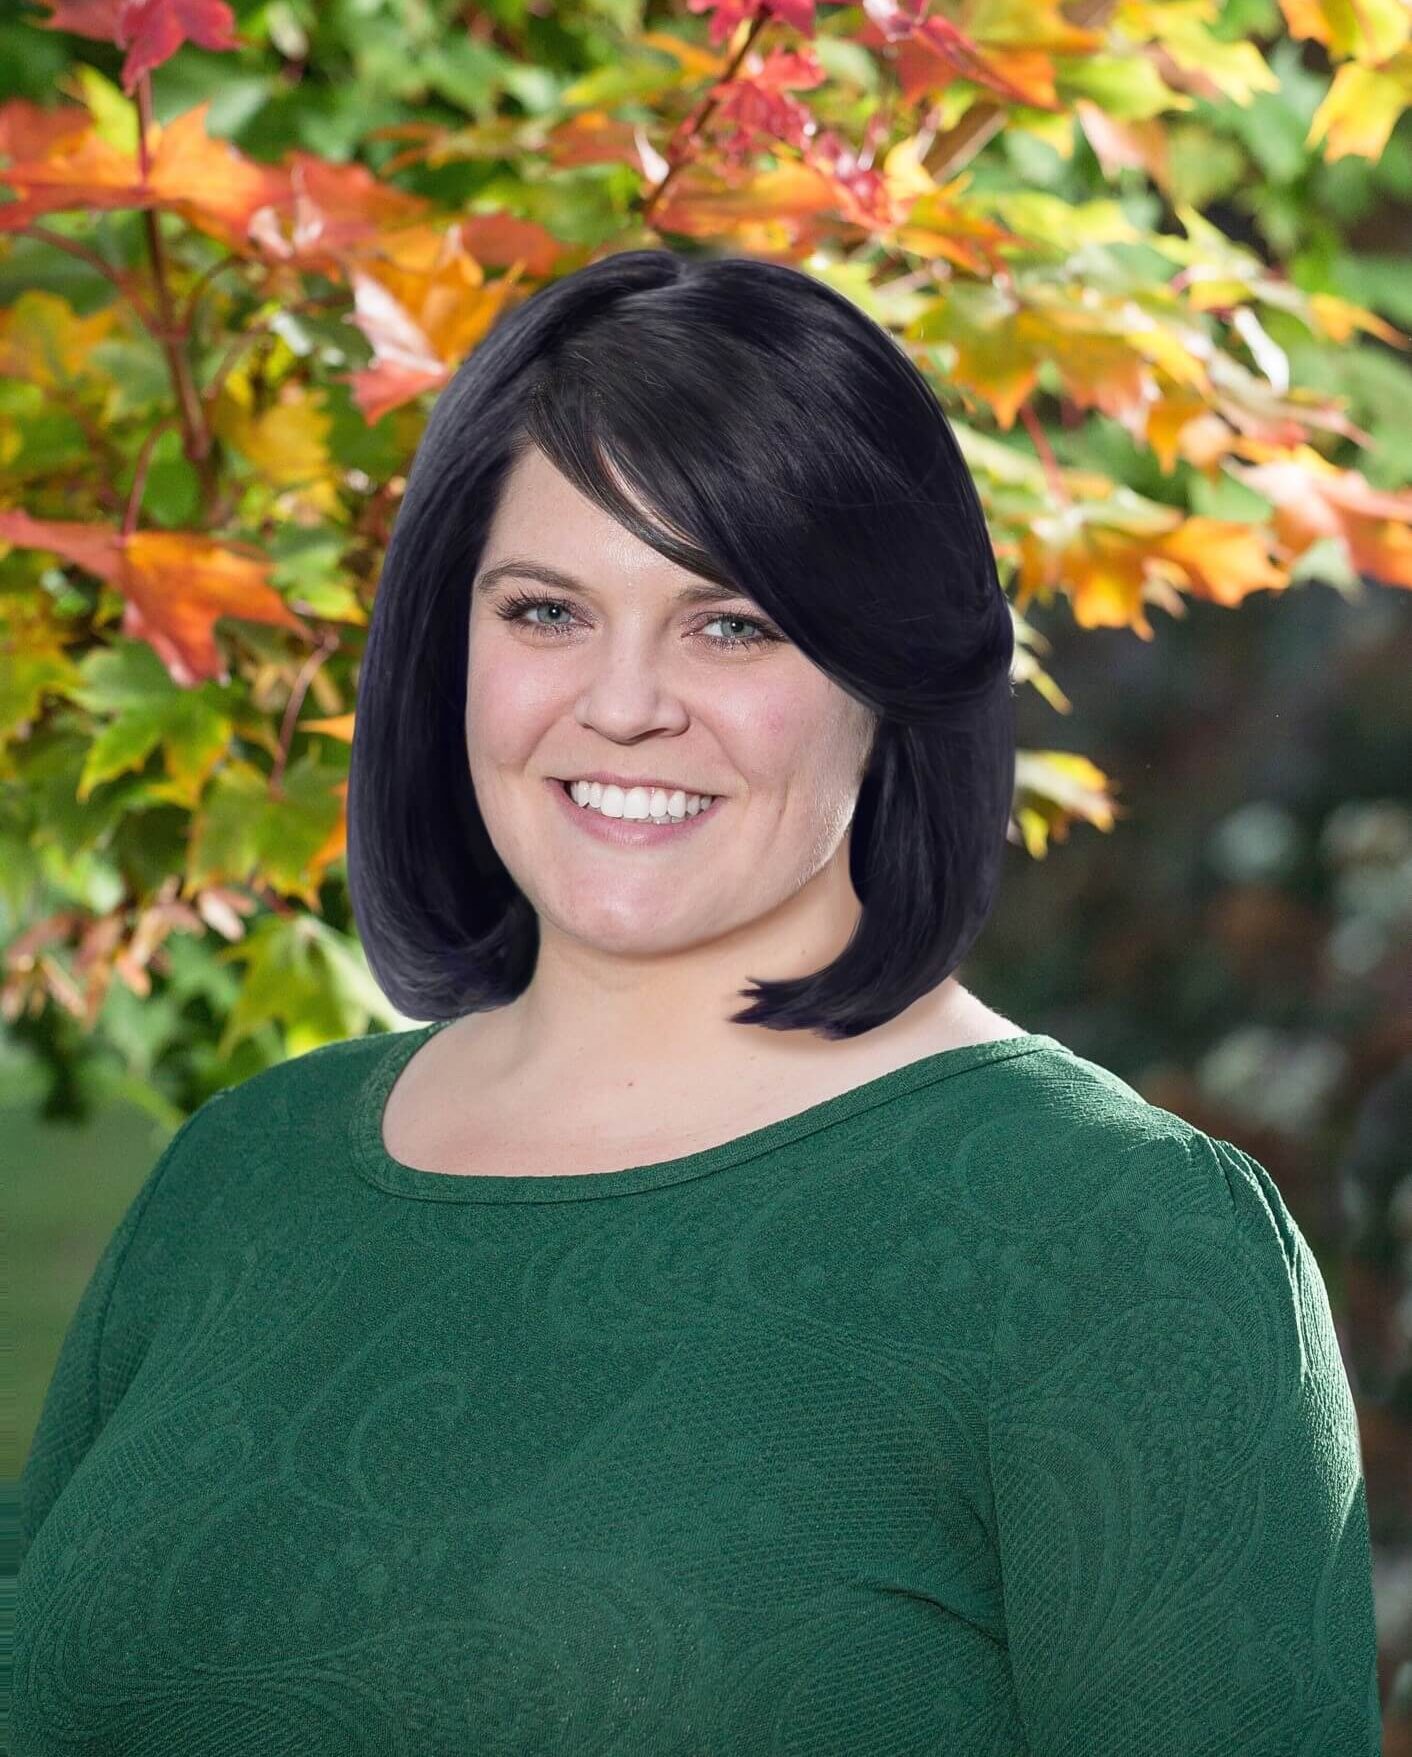 Rebecca siting and smiling in front of a autumn colored leafed tree wearing a dark green shirt. She has shoulder length dark hair.